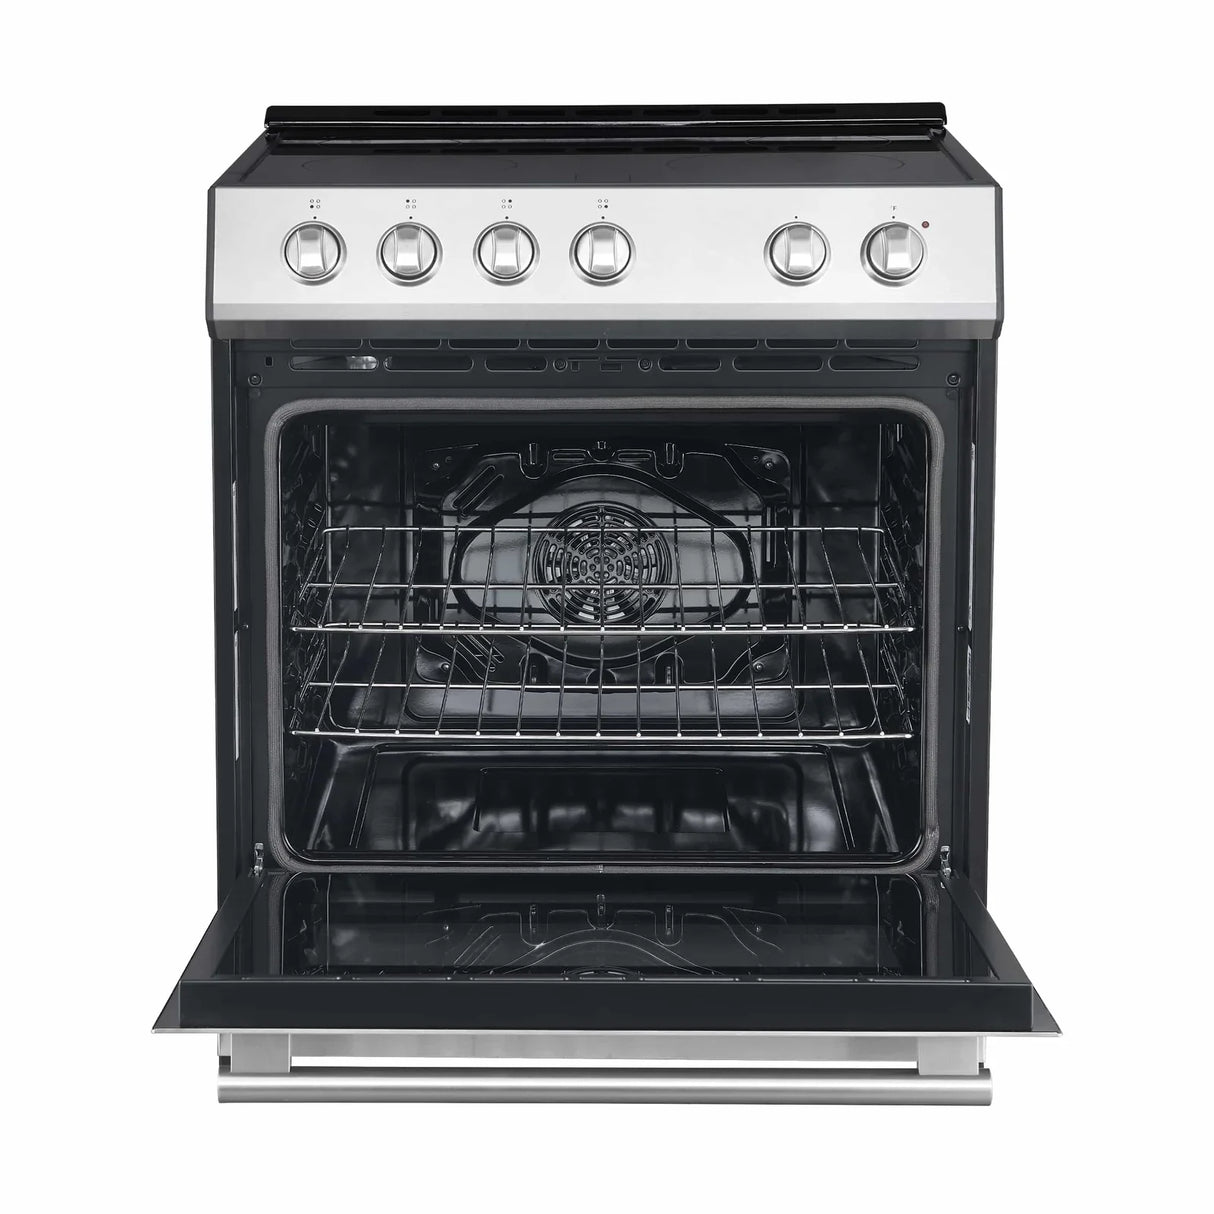 Forno Espresso 3-Piece Appliance Package - 30-Inch Electric Range with 5.0 Cu.Ft. Electric Oven, Built-In Refrigerator, and Under Cabinet Range Hood in Stainless Steel